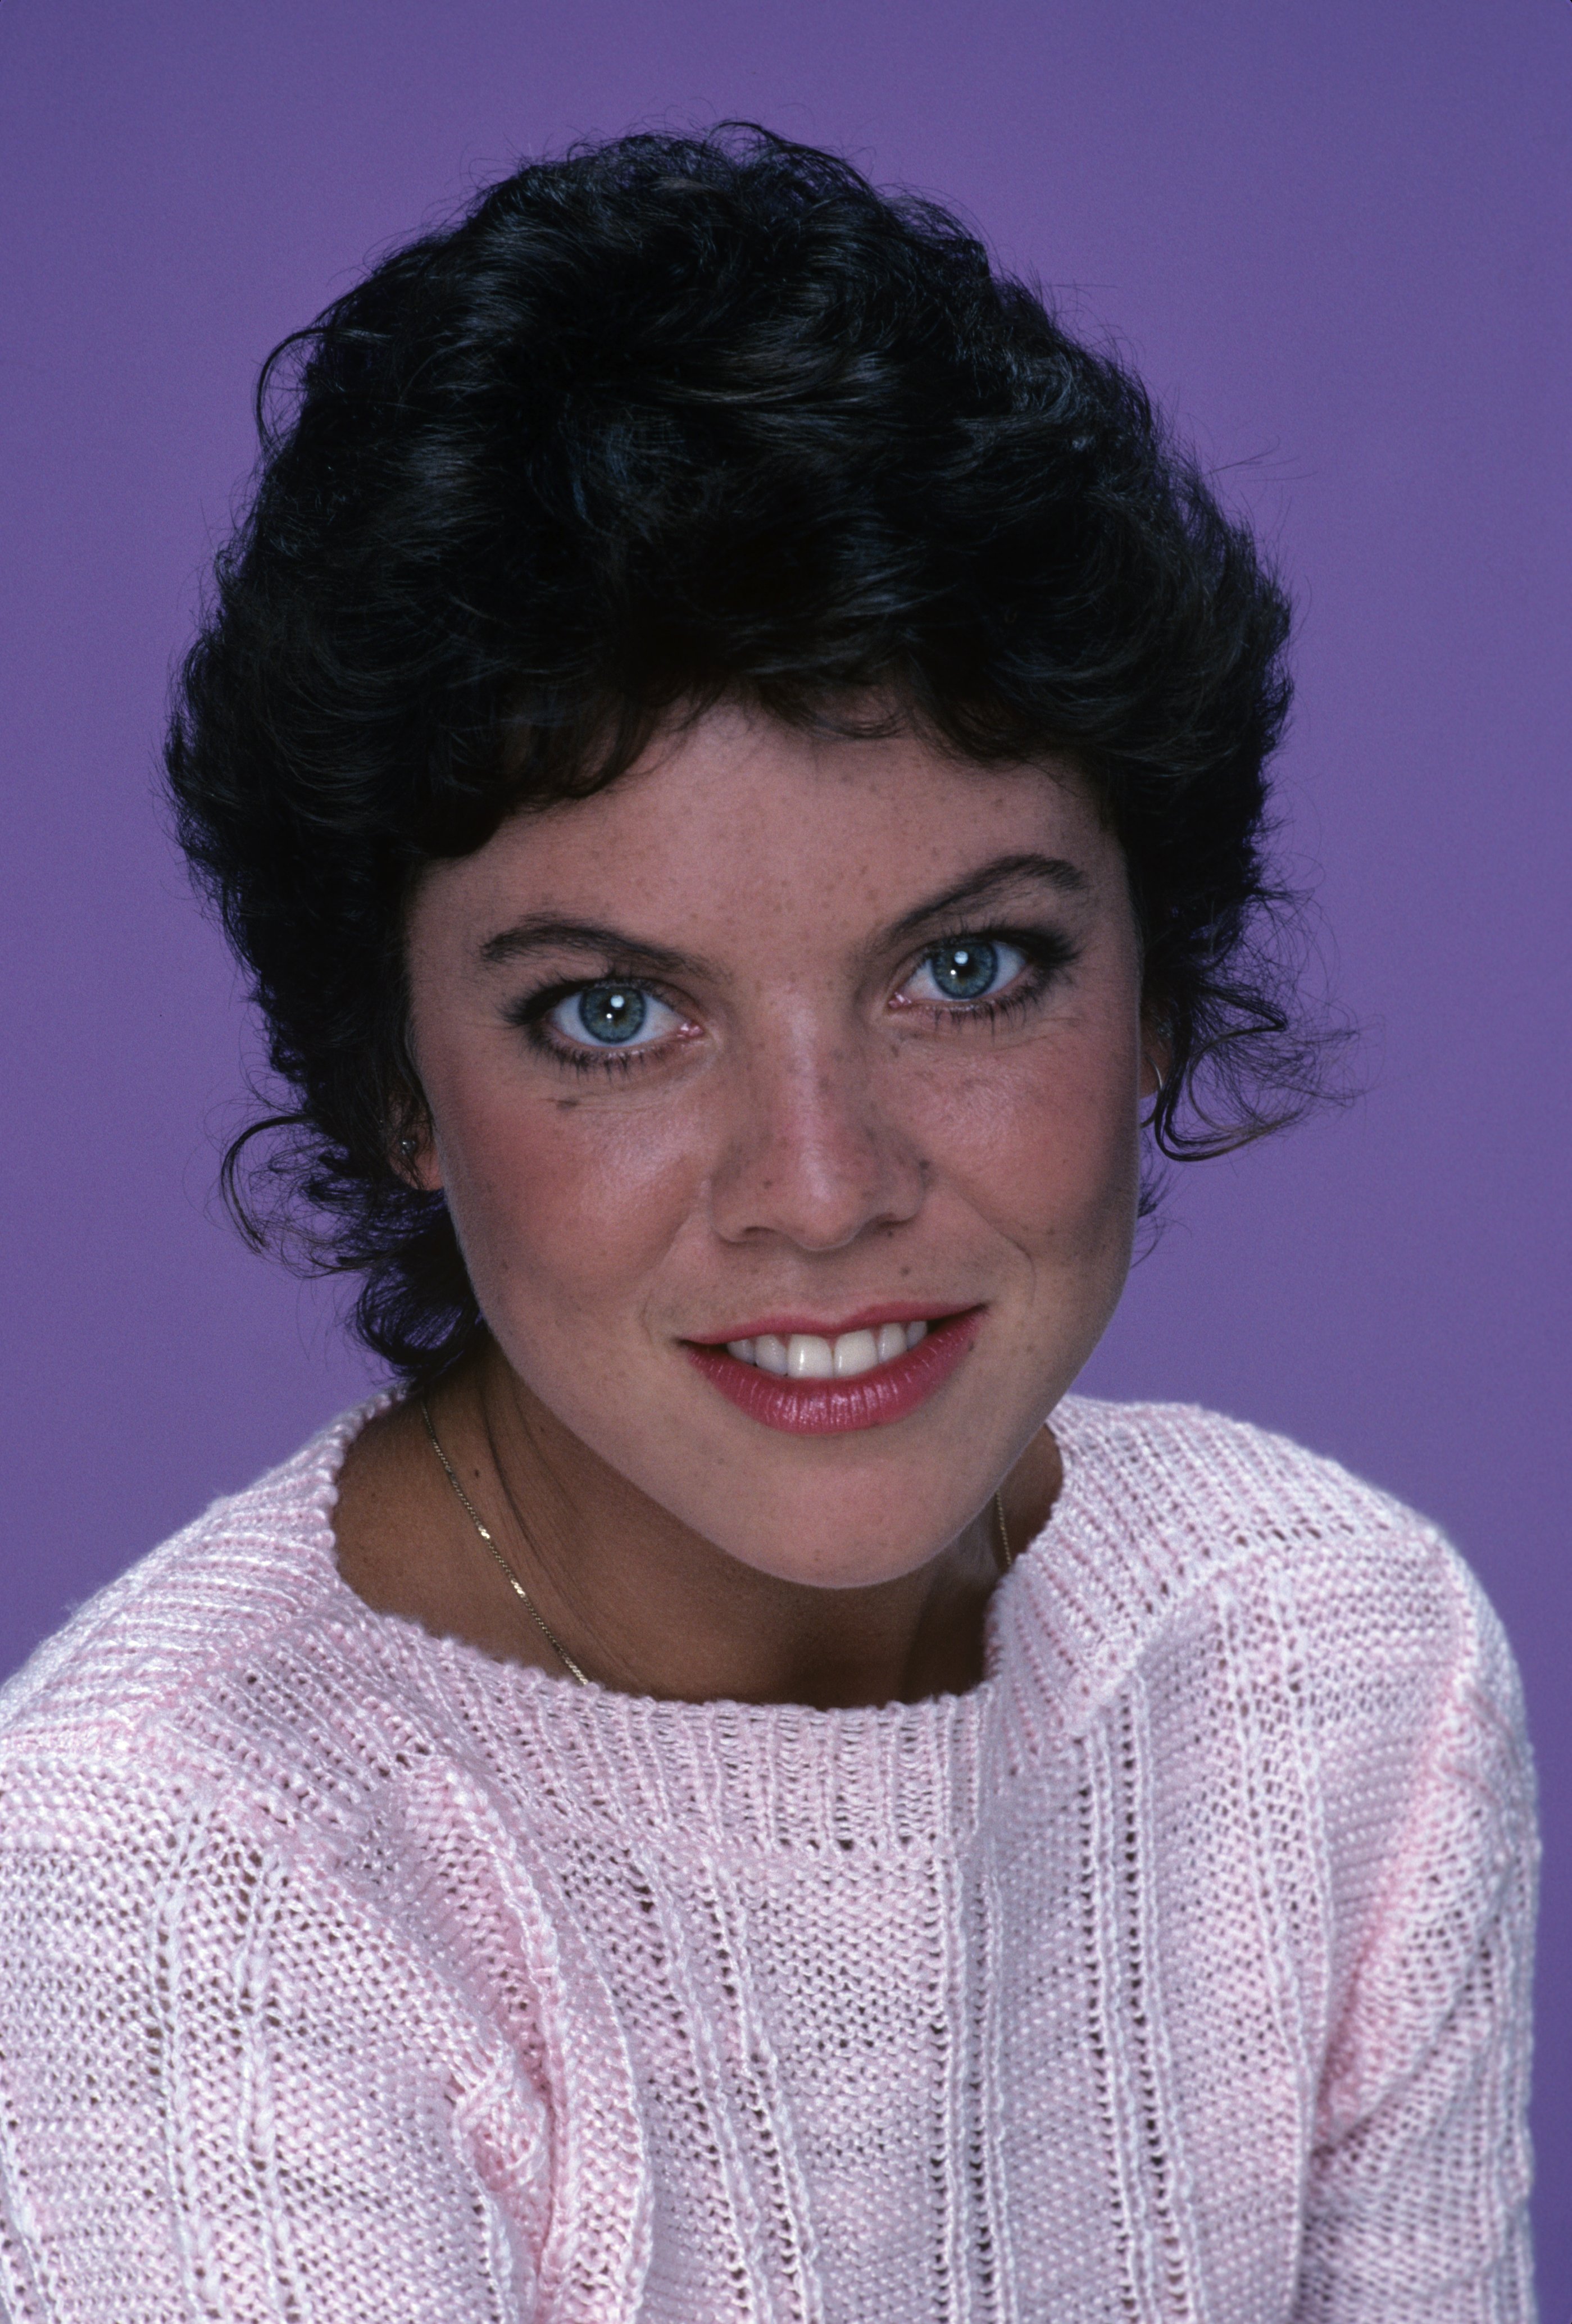 Erin Moran on "Happy Days" in 1981. | Source: Getty Images